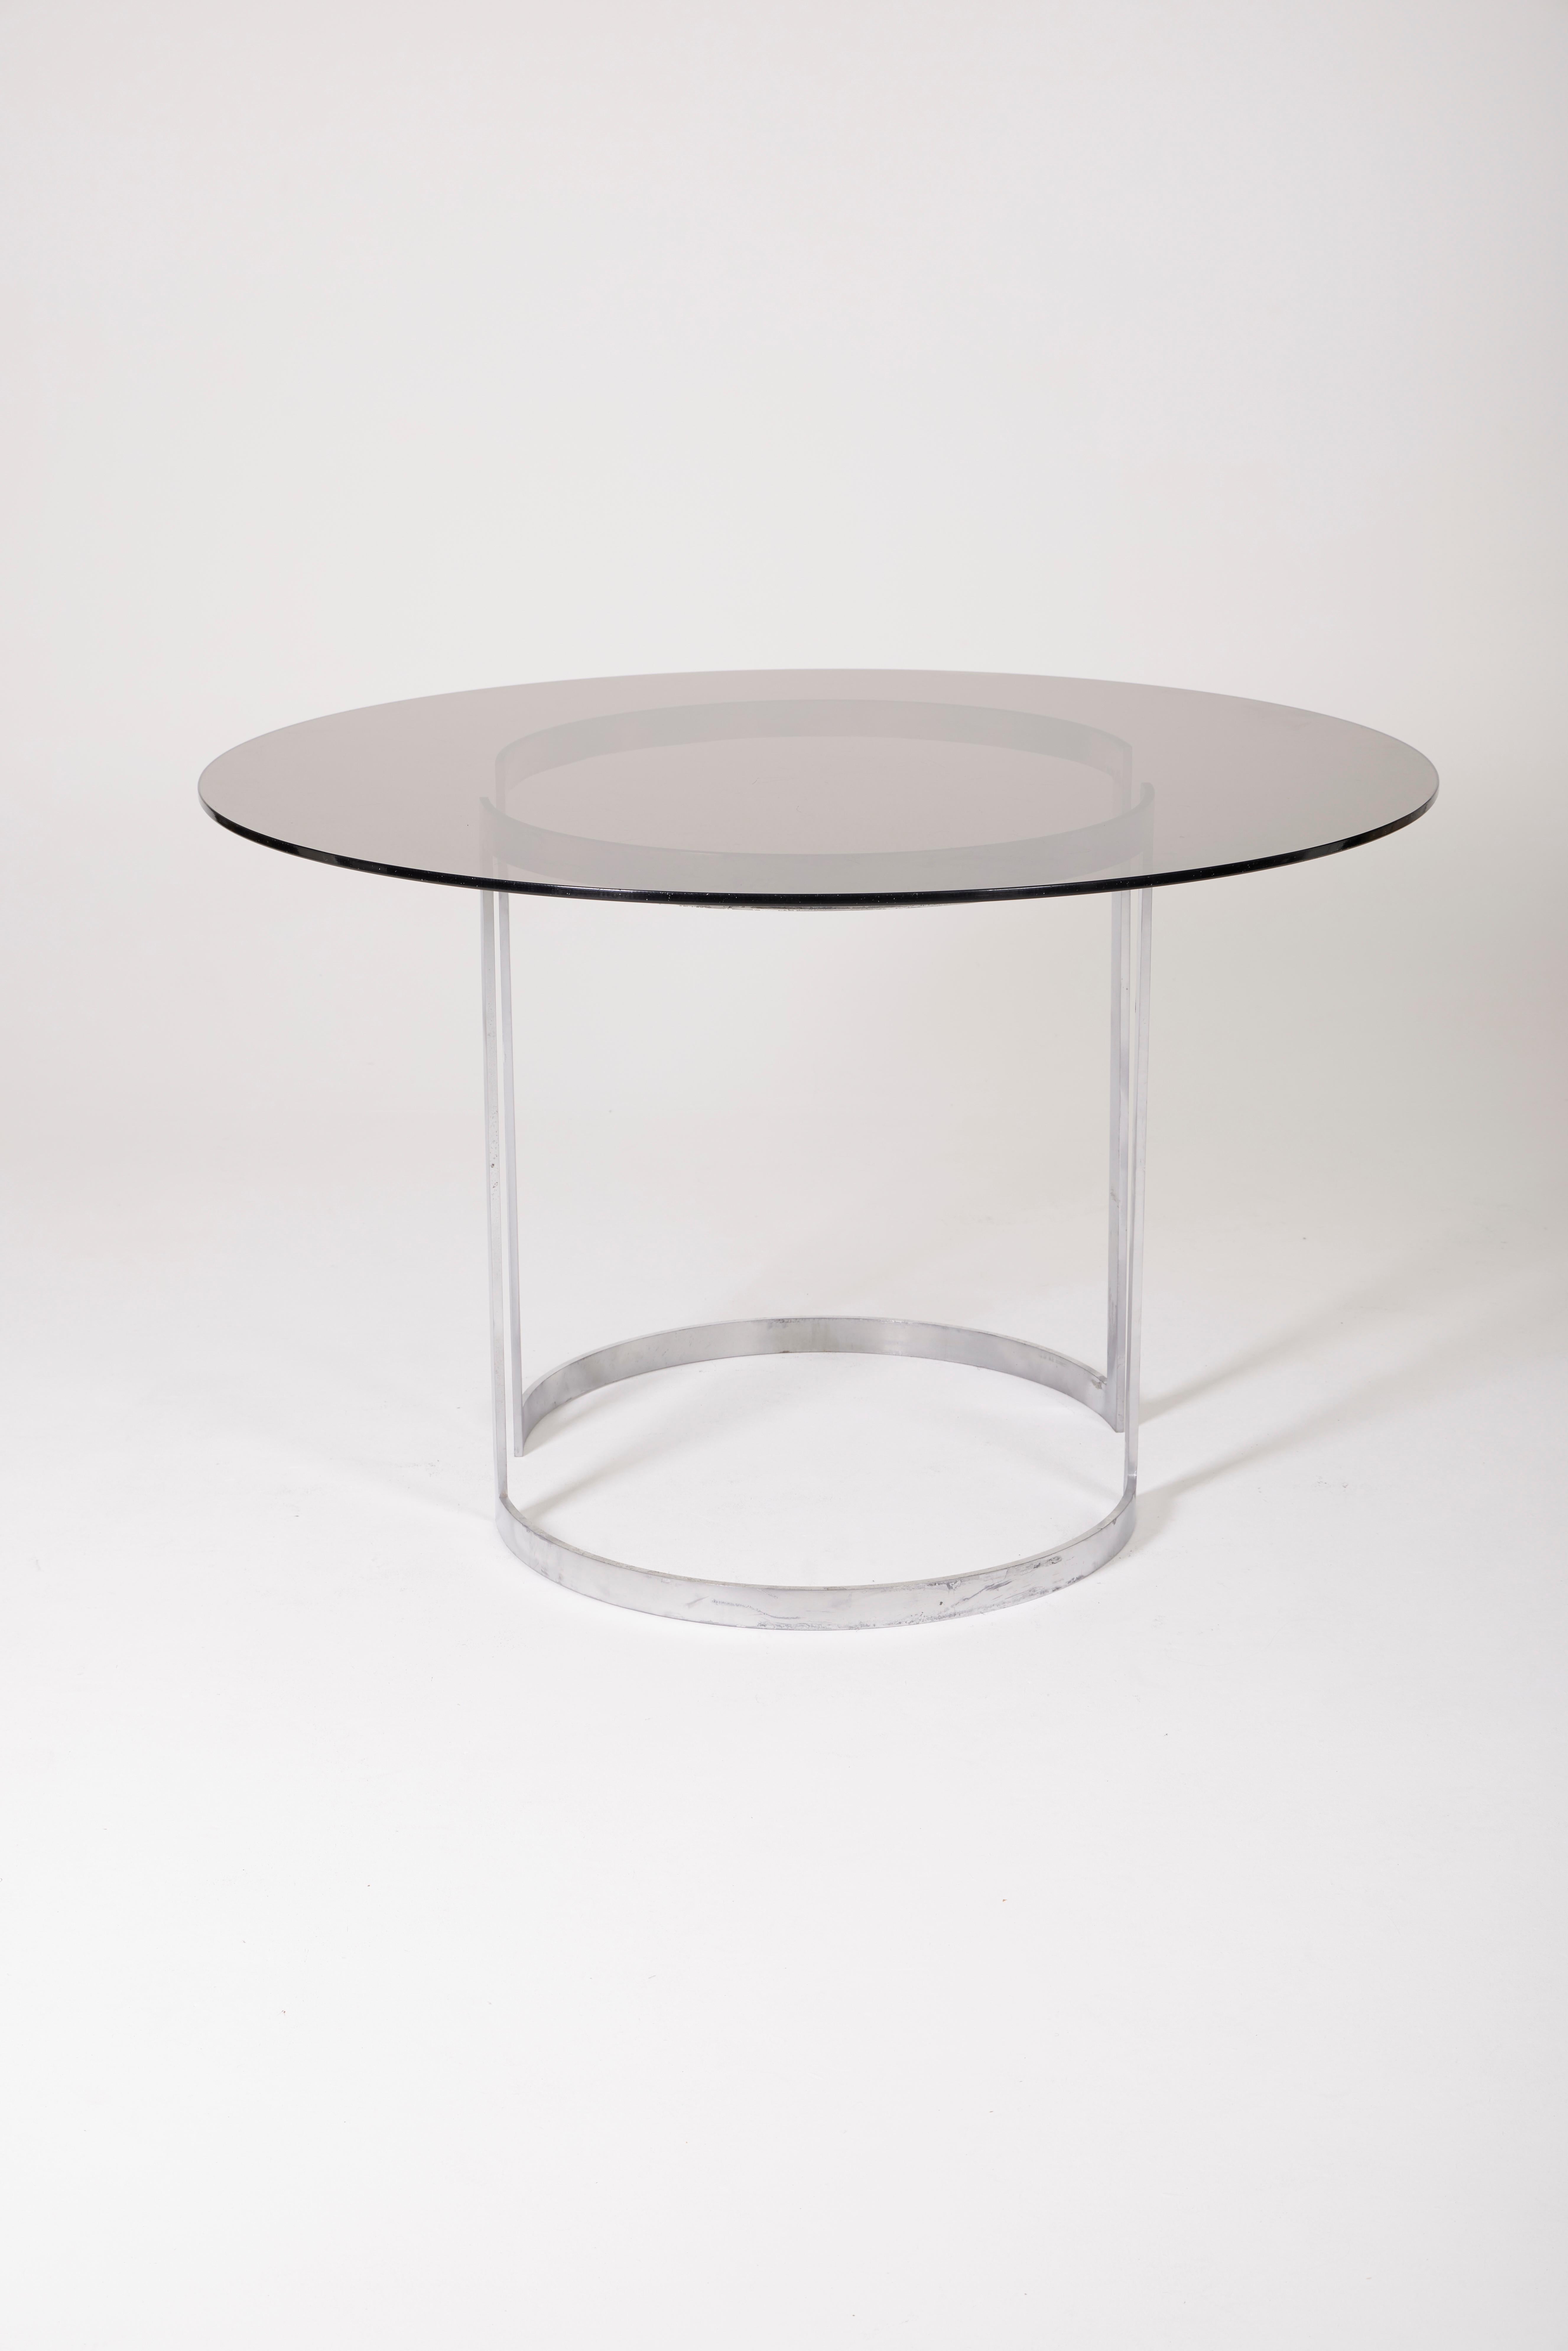 20th Century Boris Tabacoff glass and metal table For Sale